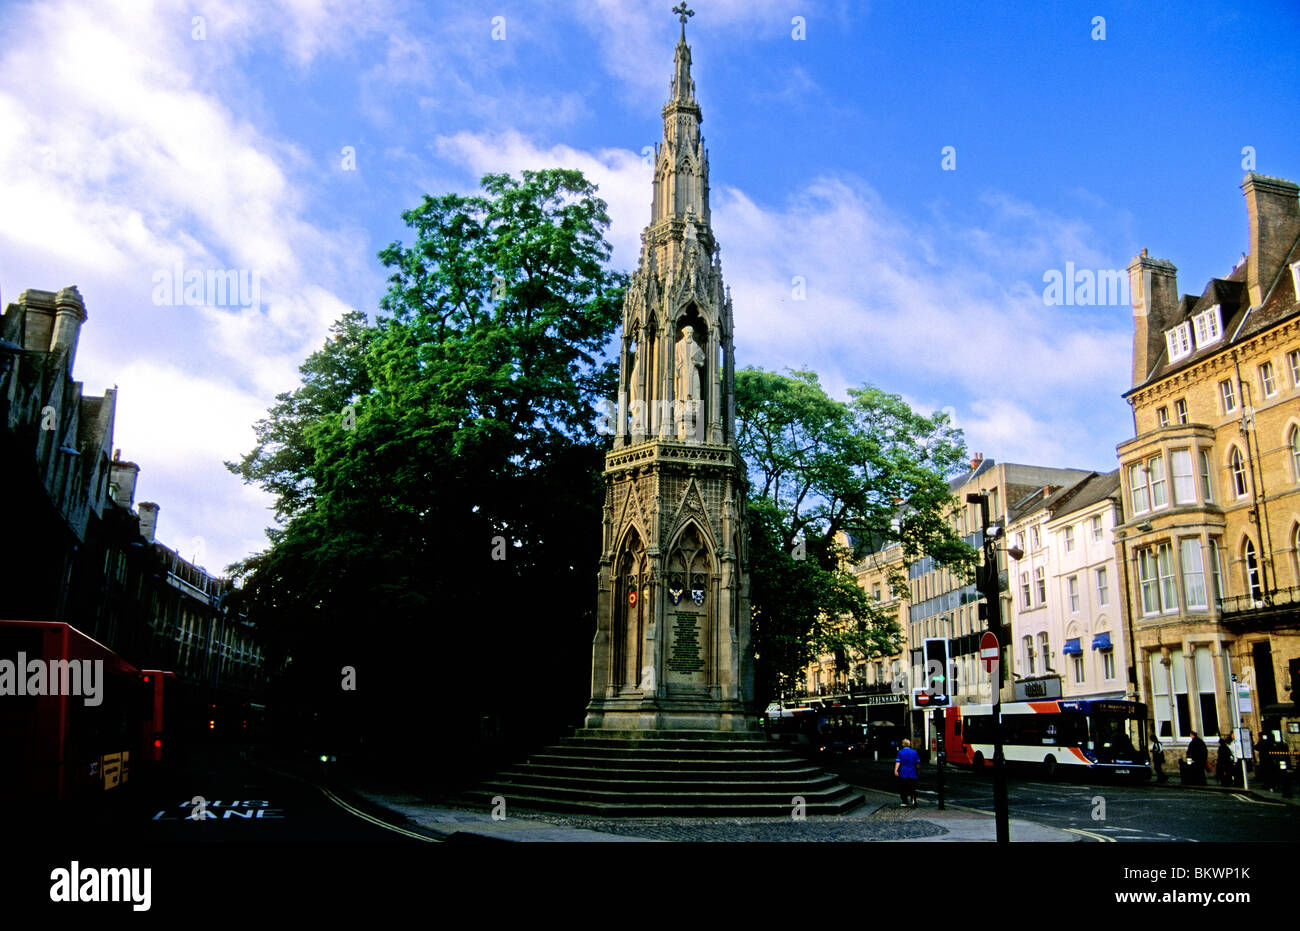 The Martyr's Memorial, Oxford, England, commemorating the deaths of Nicholas Ridley, Hugh Latimer and Thomas Cranmer in 1555 Stock Photo